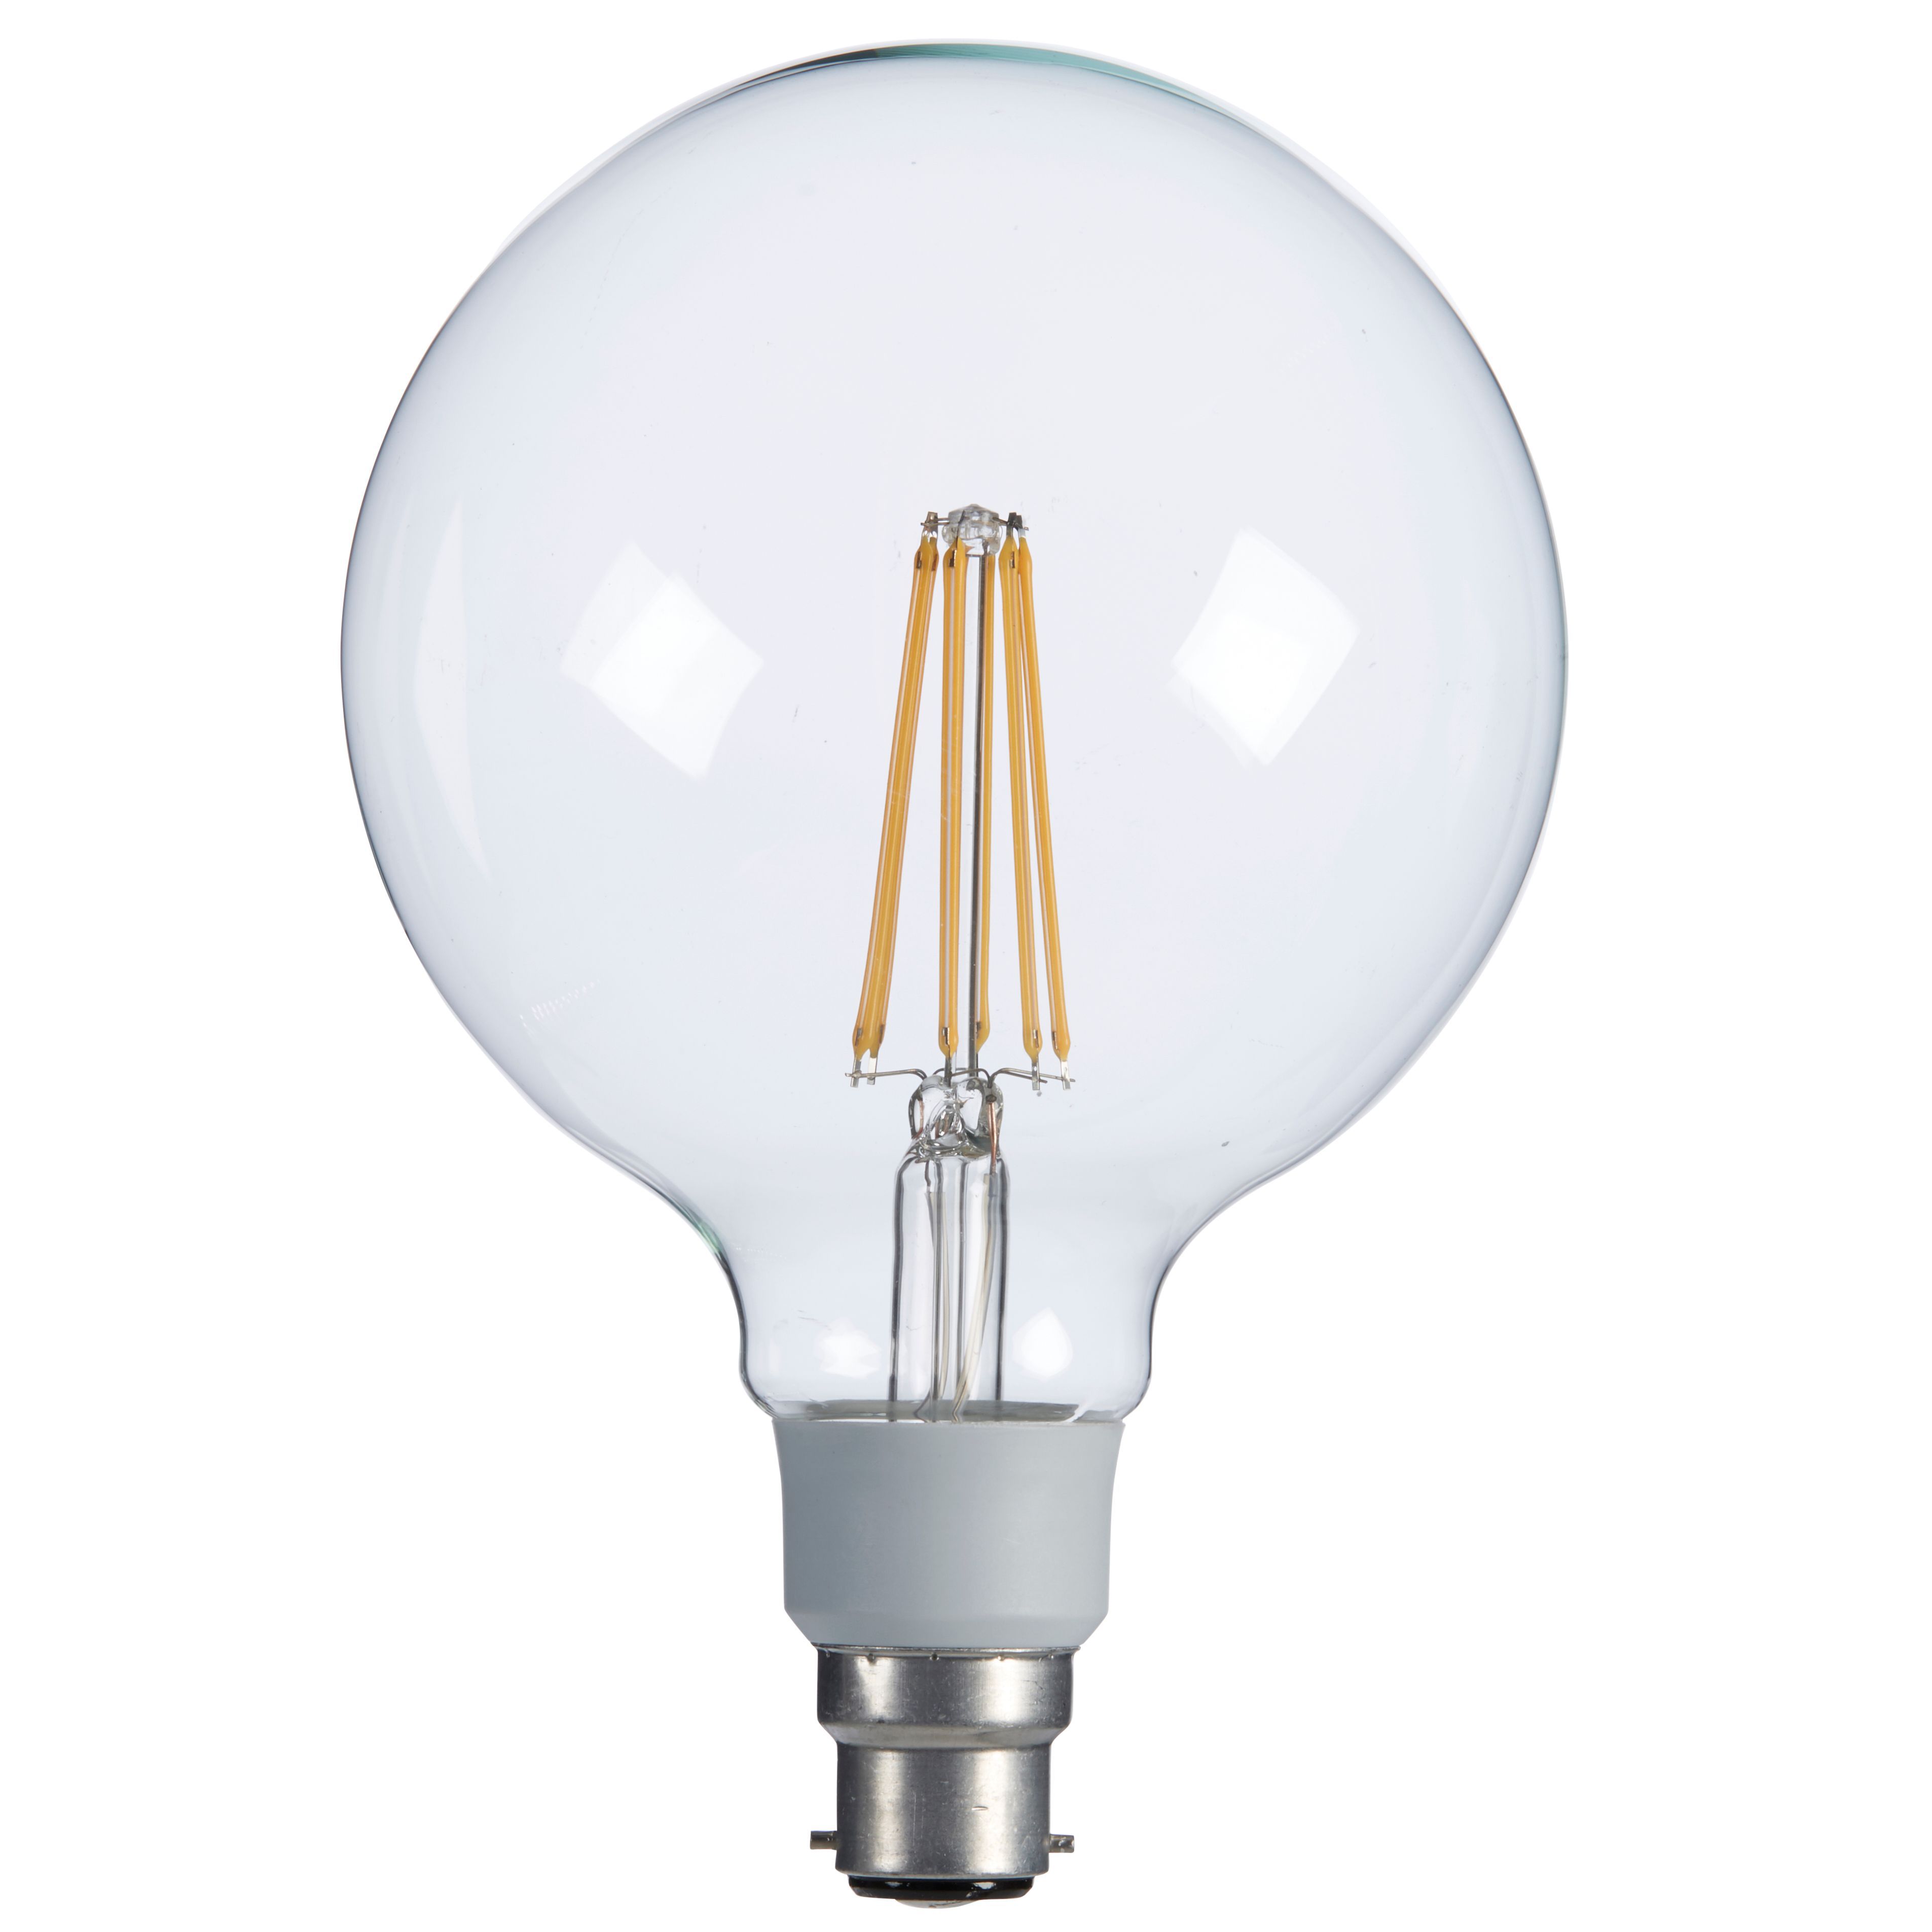 Diall B22 1521lm GLS Warm white LED Dimmable Light bulb